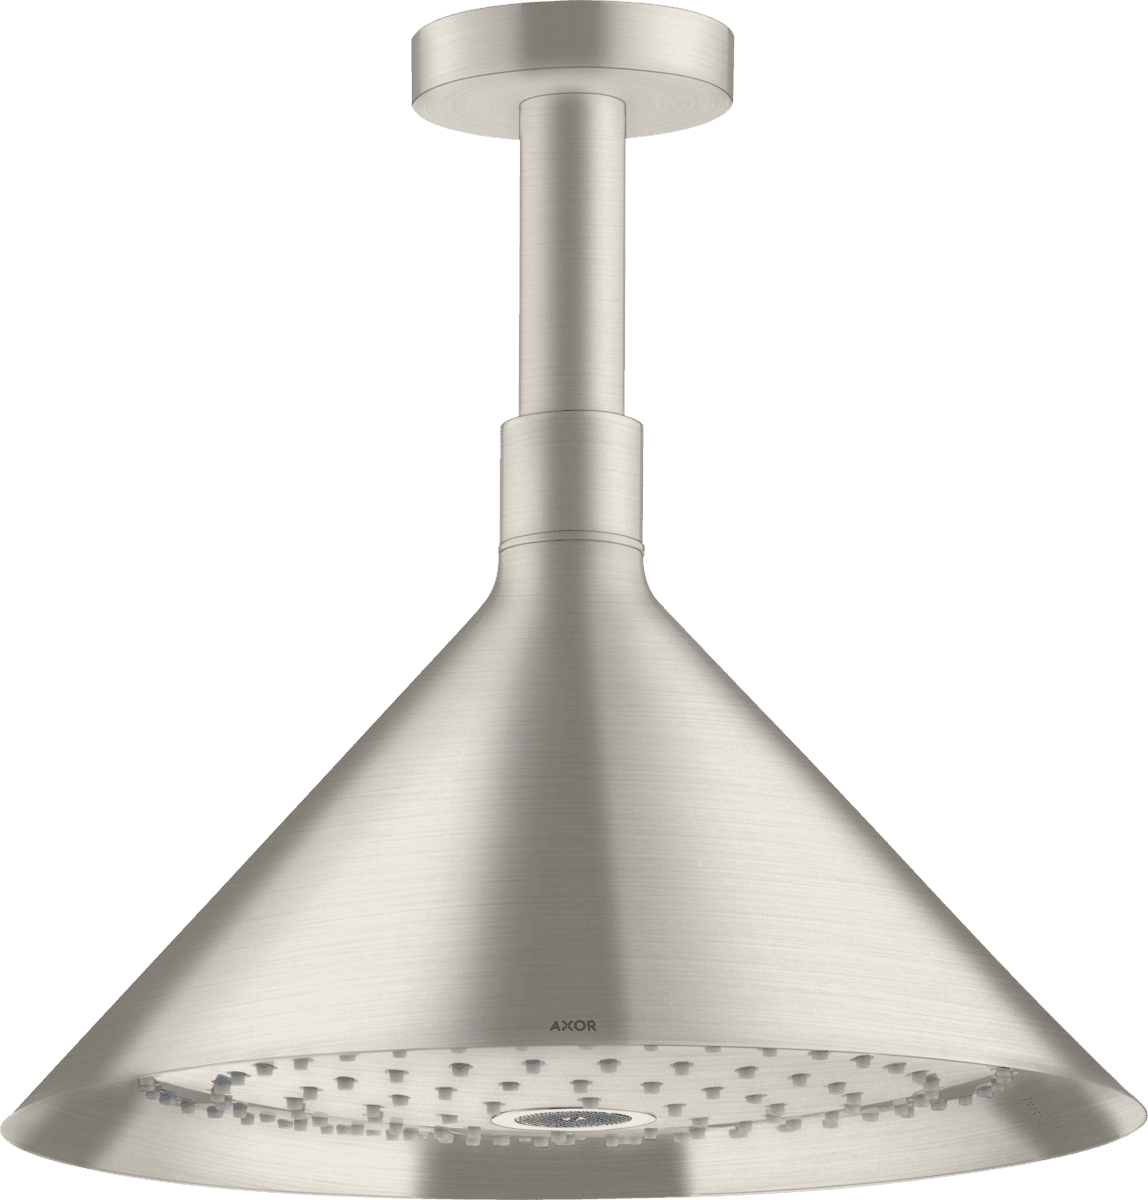 Picture of HANSGROHE AXOR Showers/Front Overhead shower 240 2jet with ceiling connector #26022800 - Stainless Steel Optic